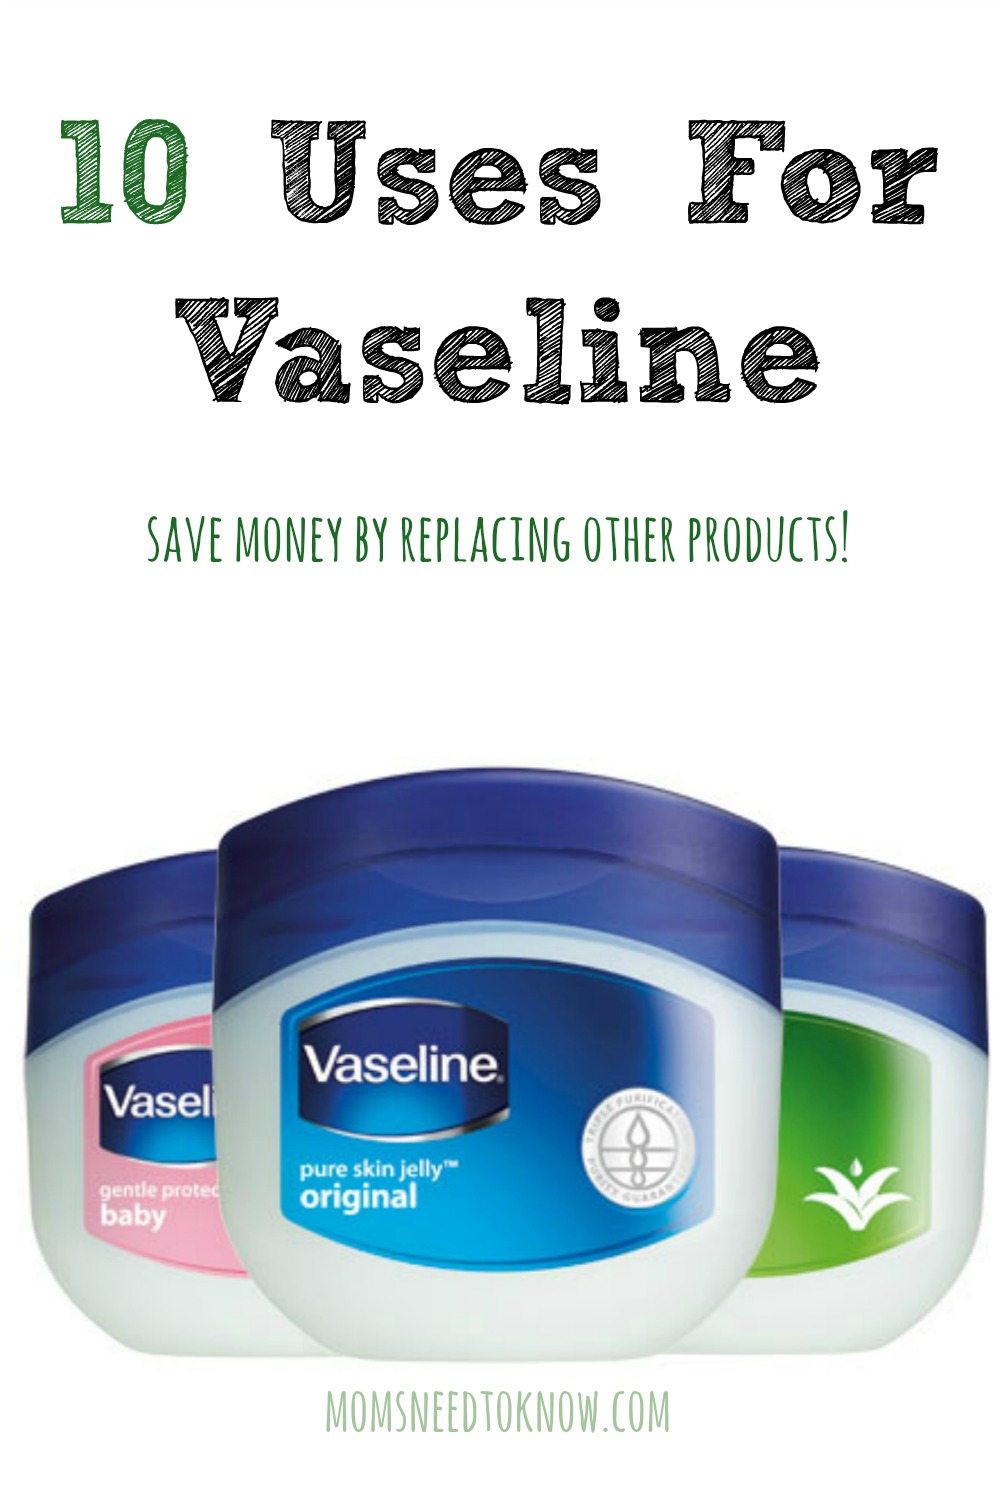 There are just so many uses for Vaseline (petroleum jelly) - from removing your eye makeup (or even making new makeup) to curing dry feet, manicures + more! 